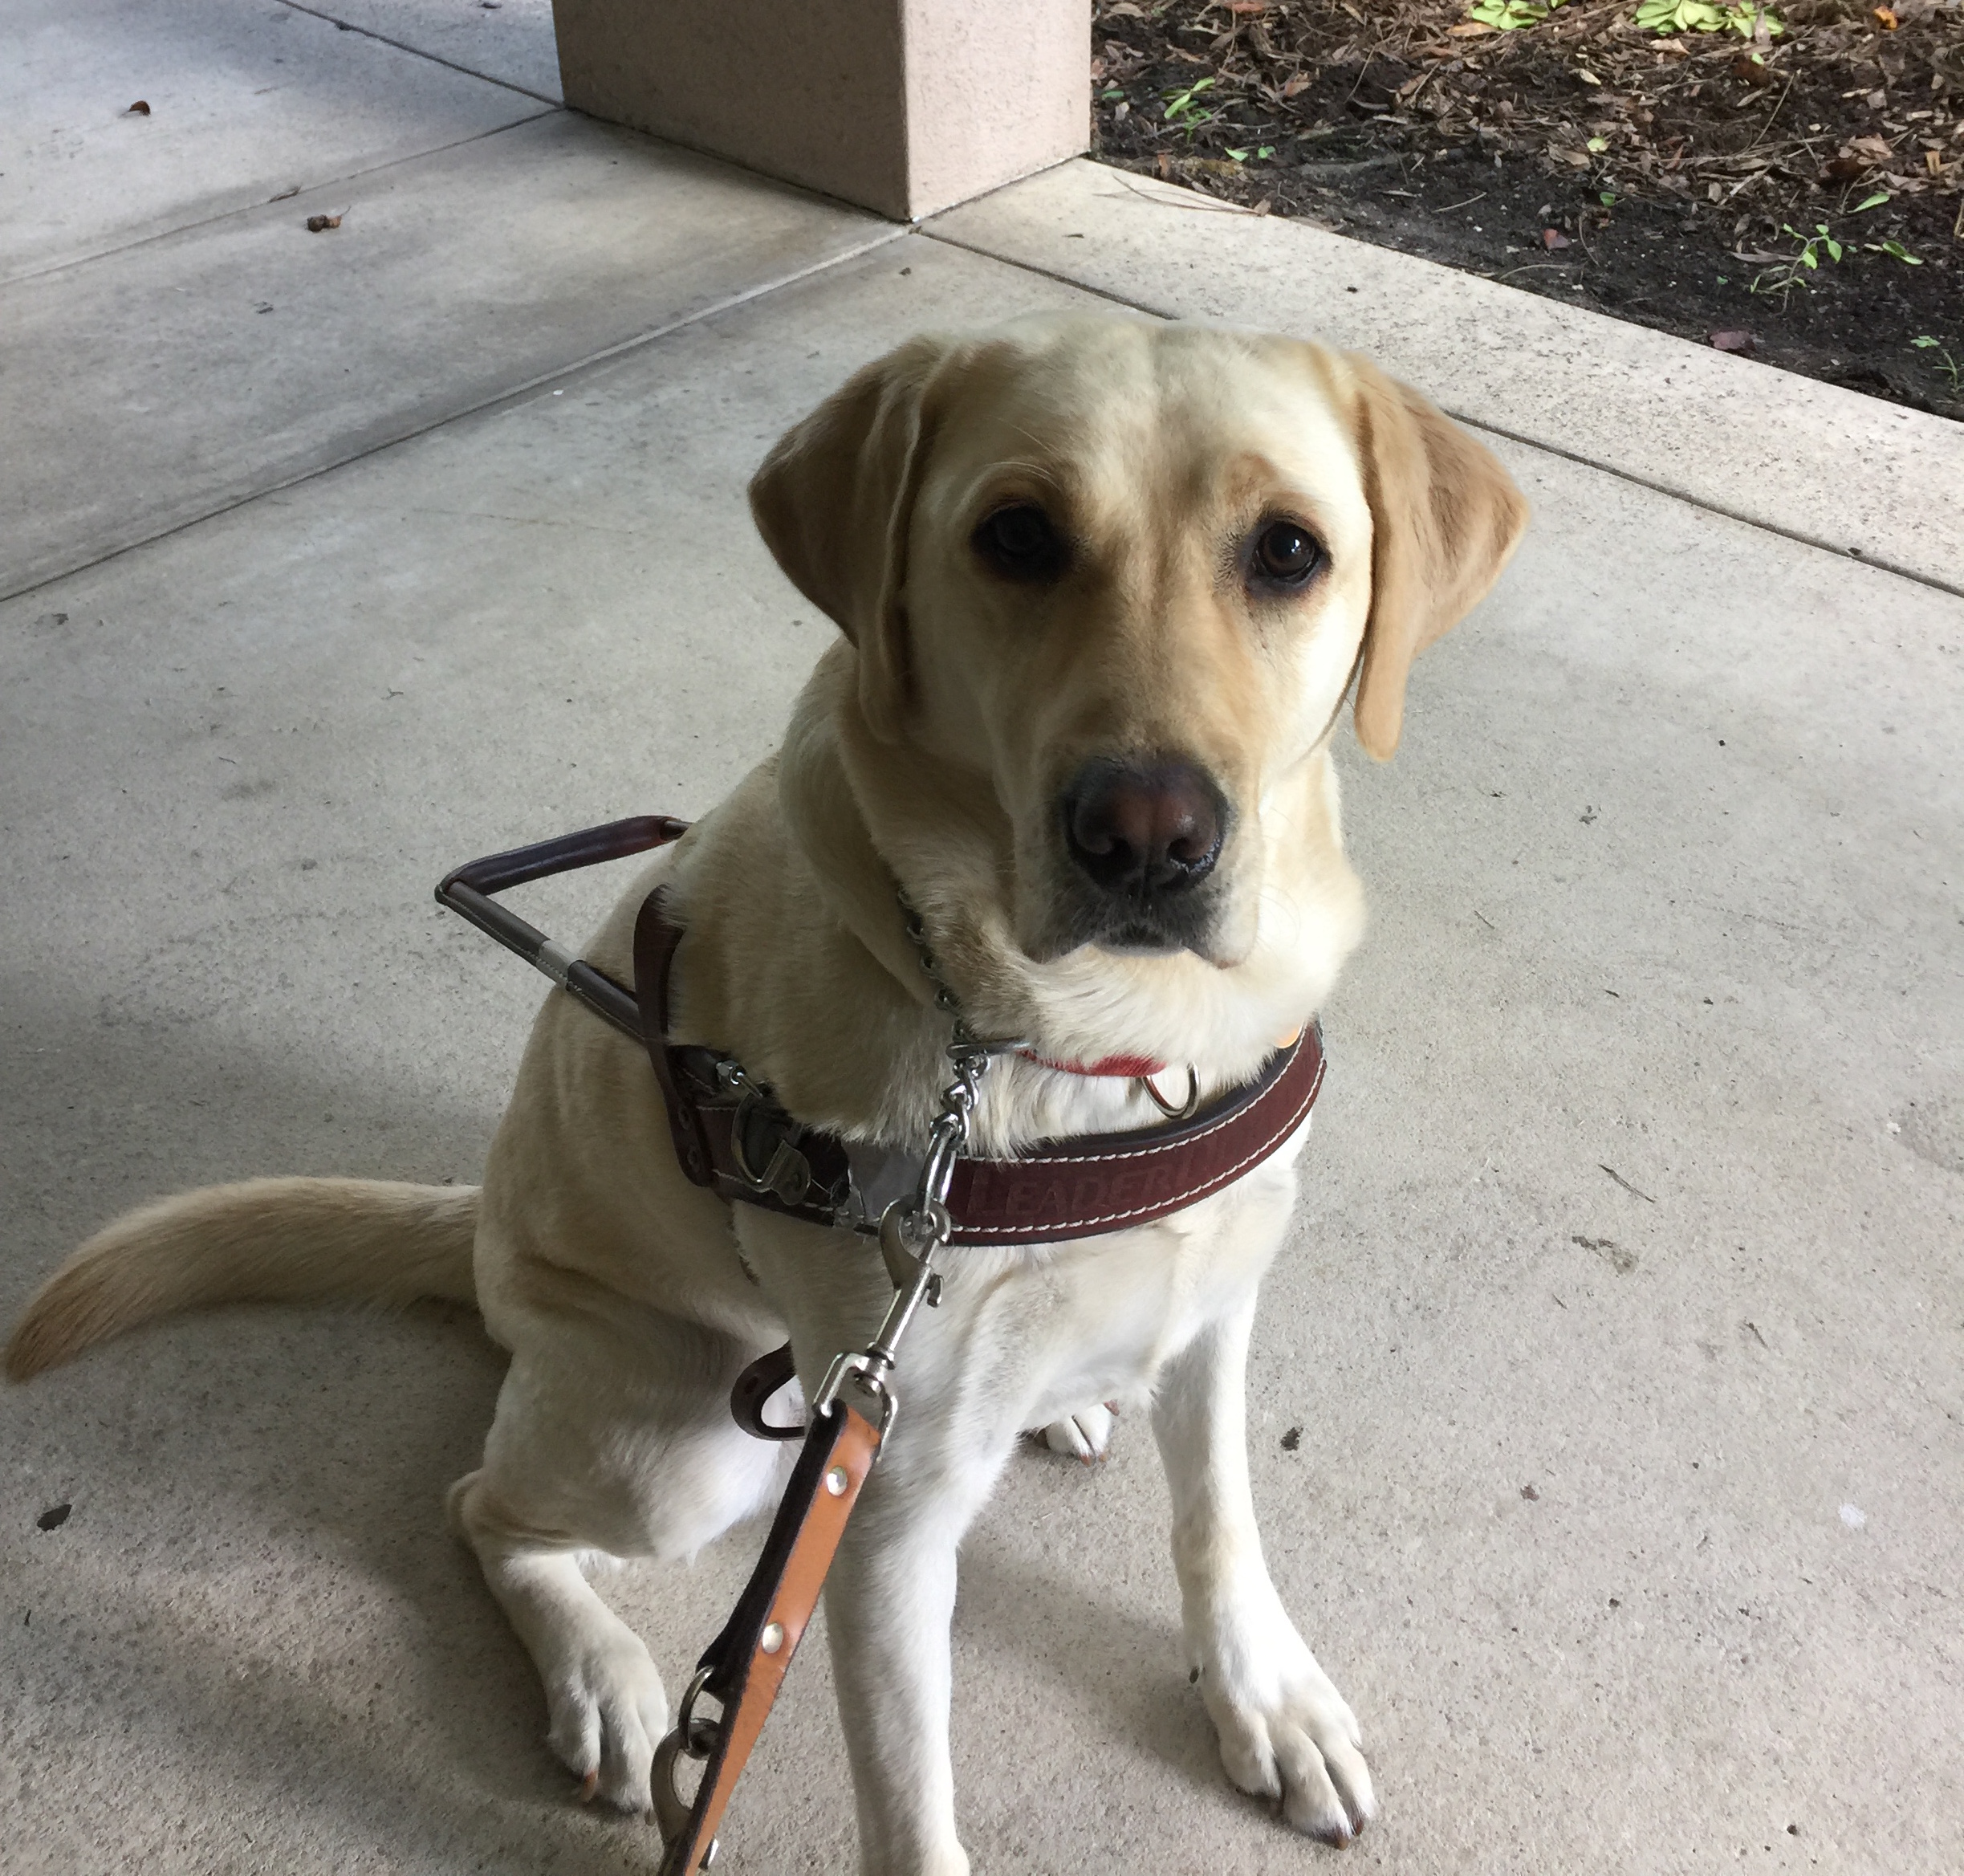 Honoring National Guide Dog Month